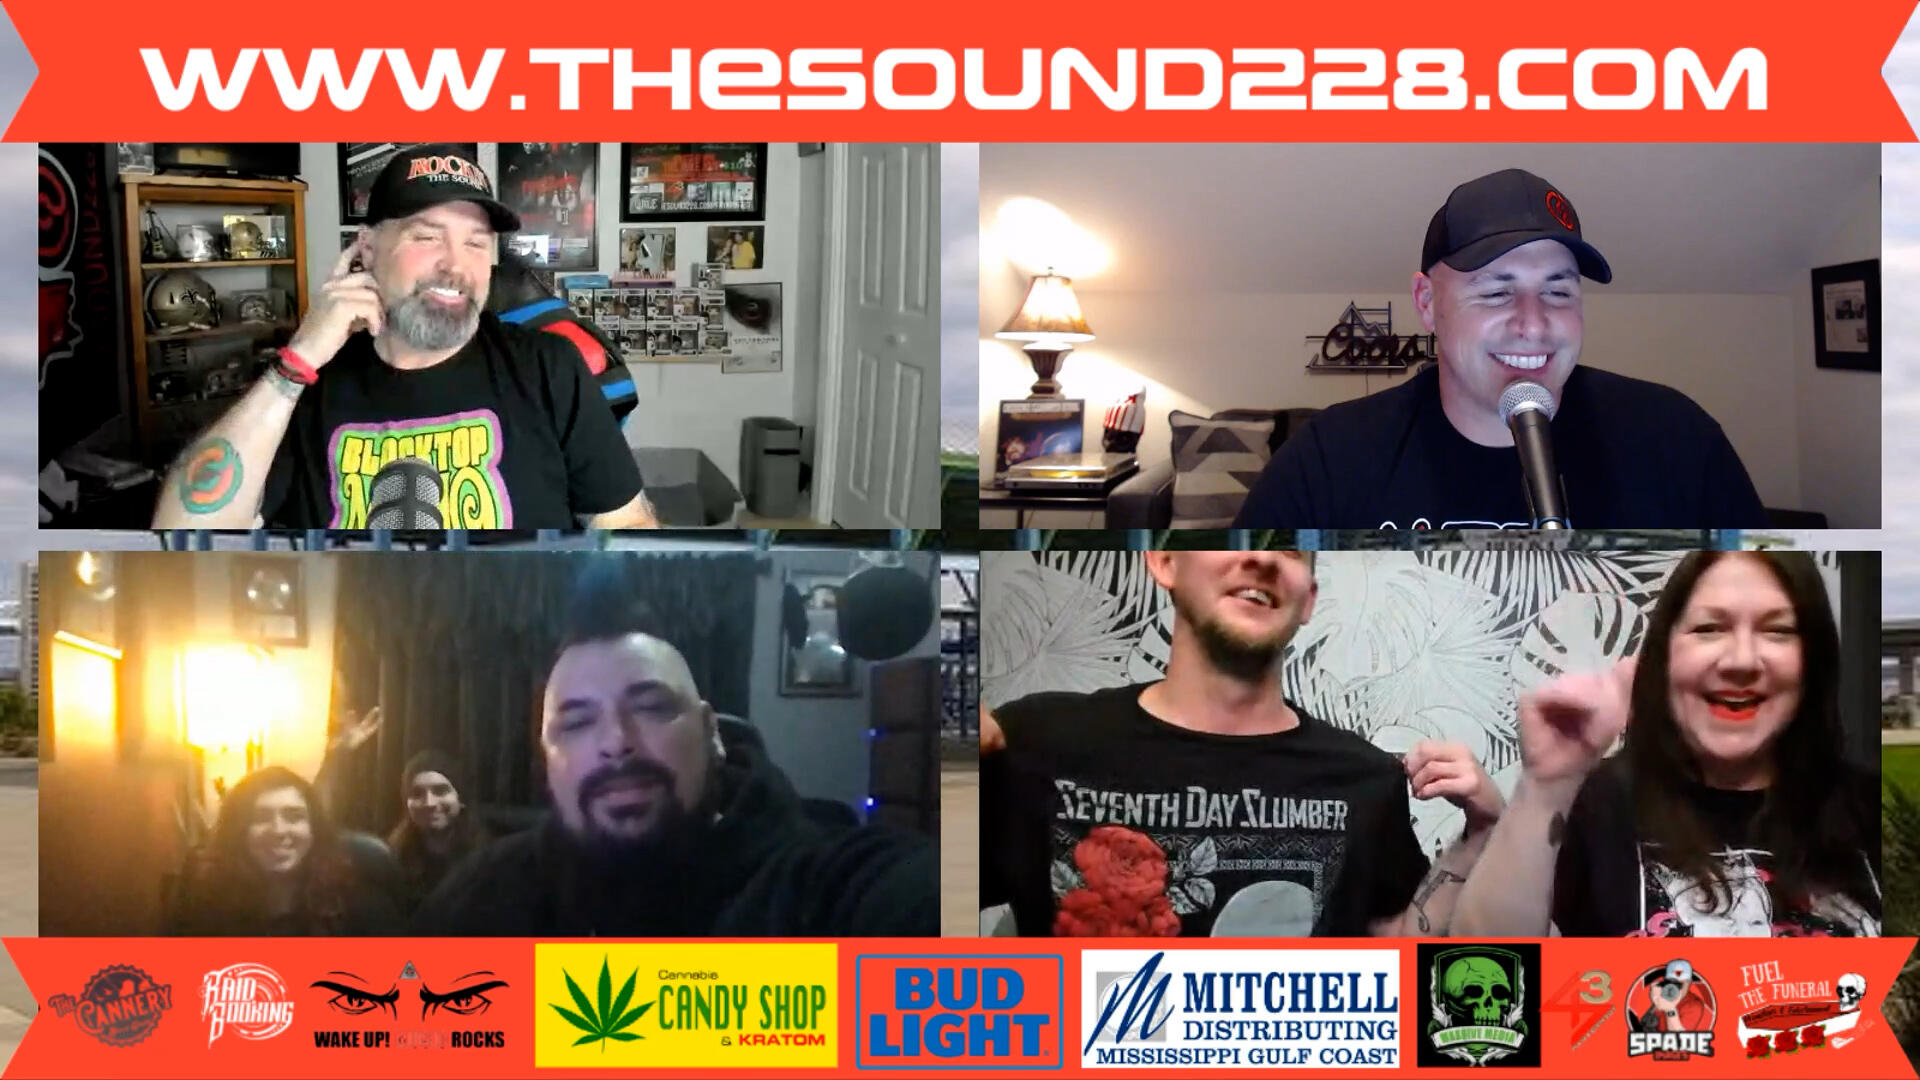 The Sound  a podcast by thesound228